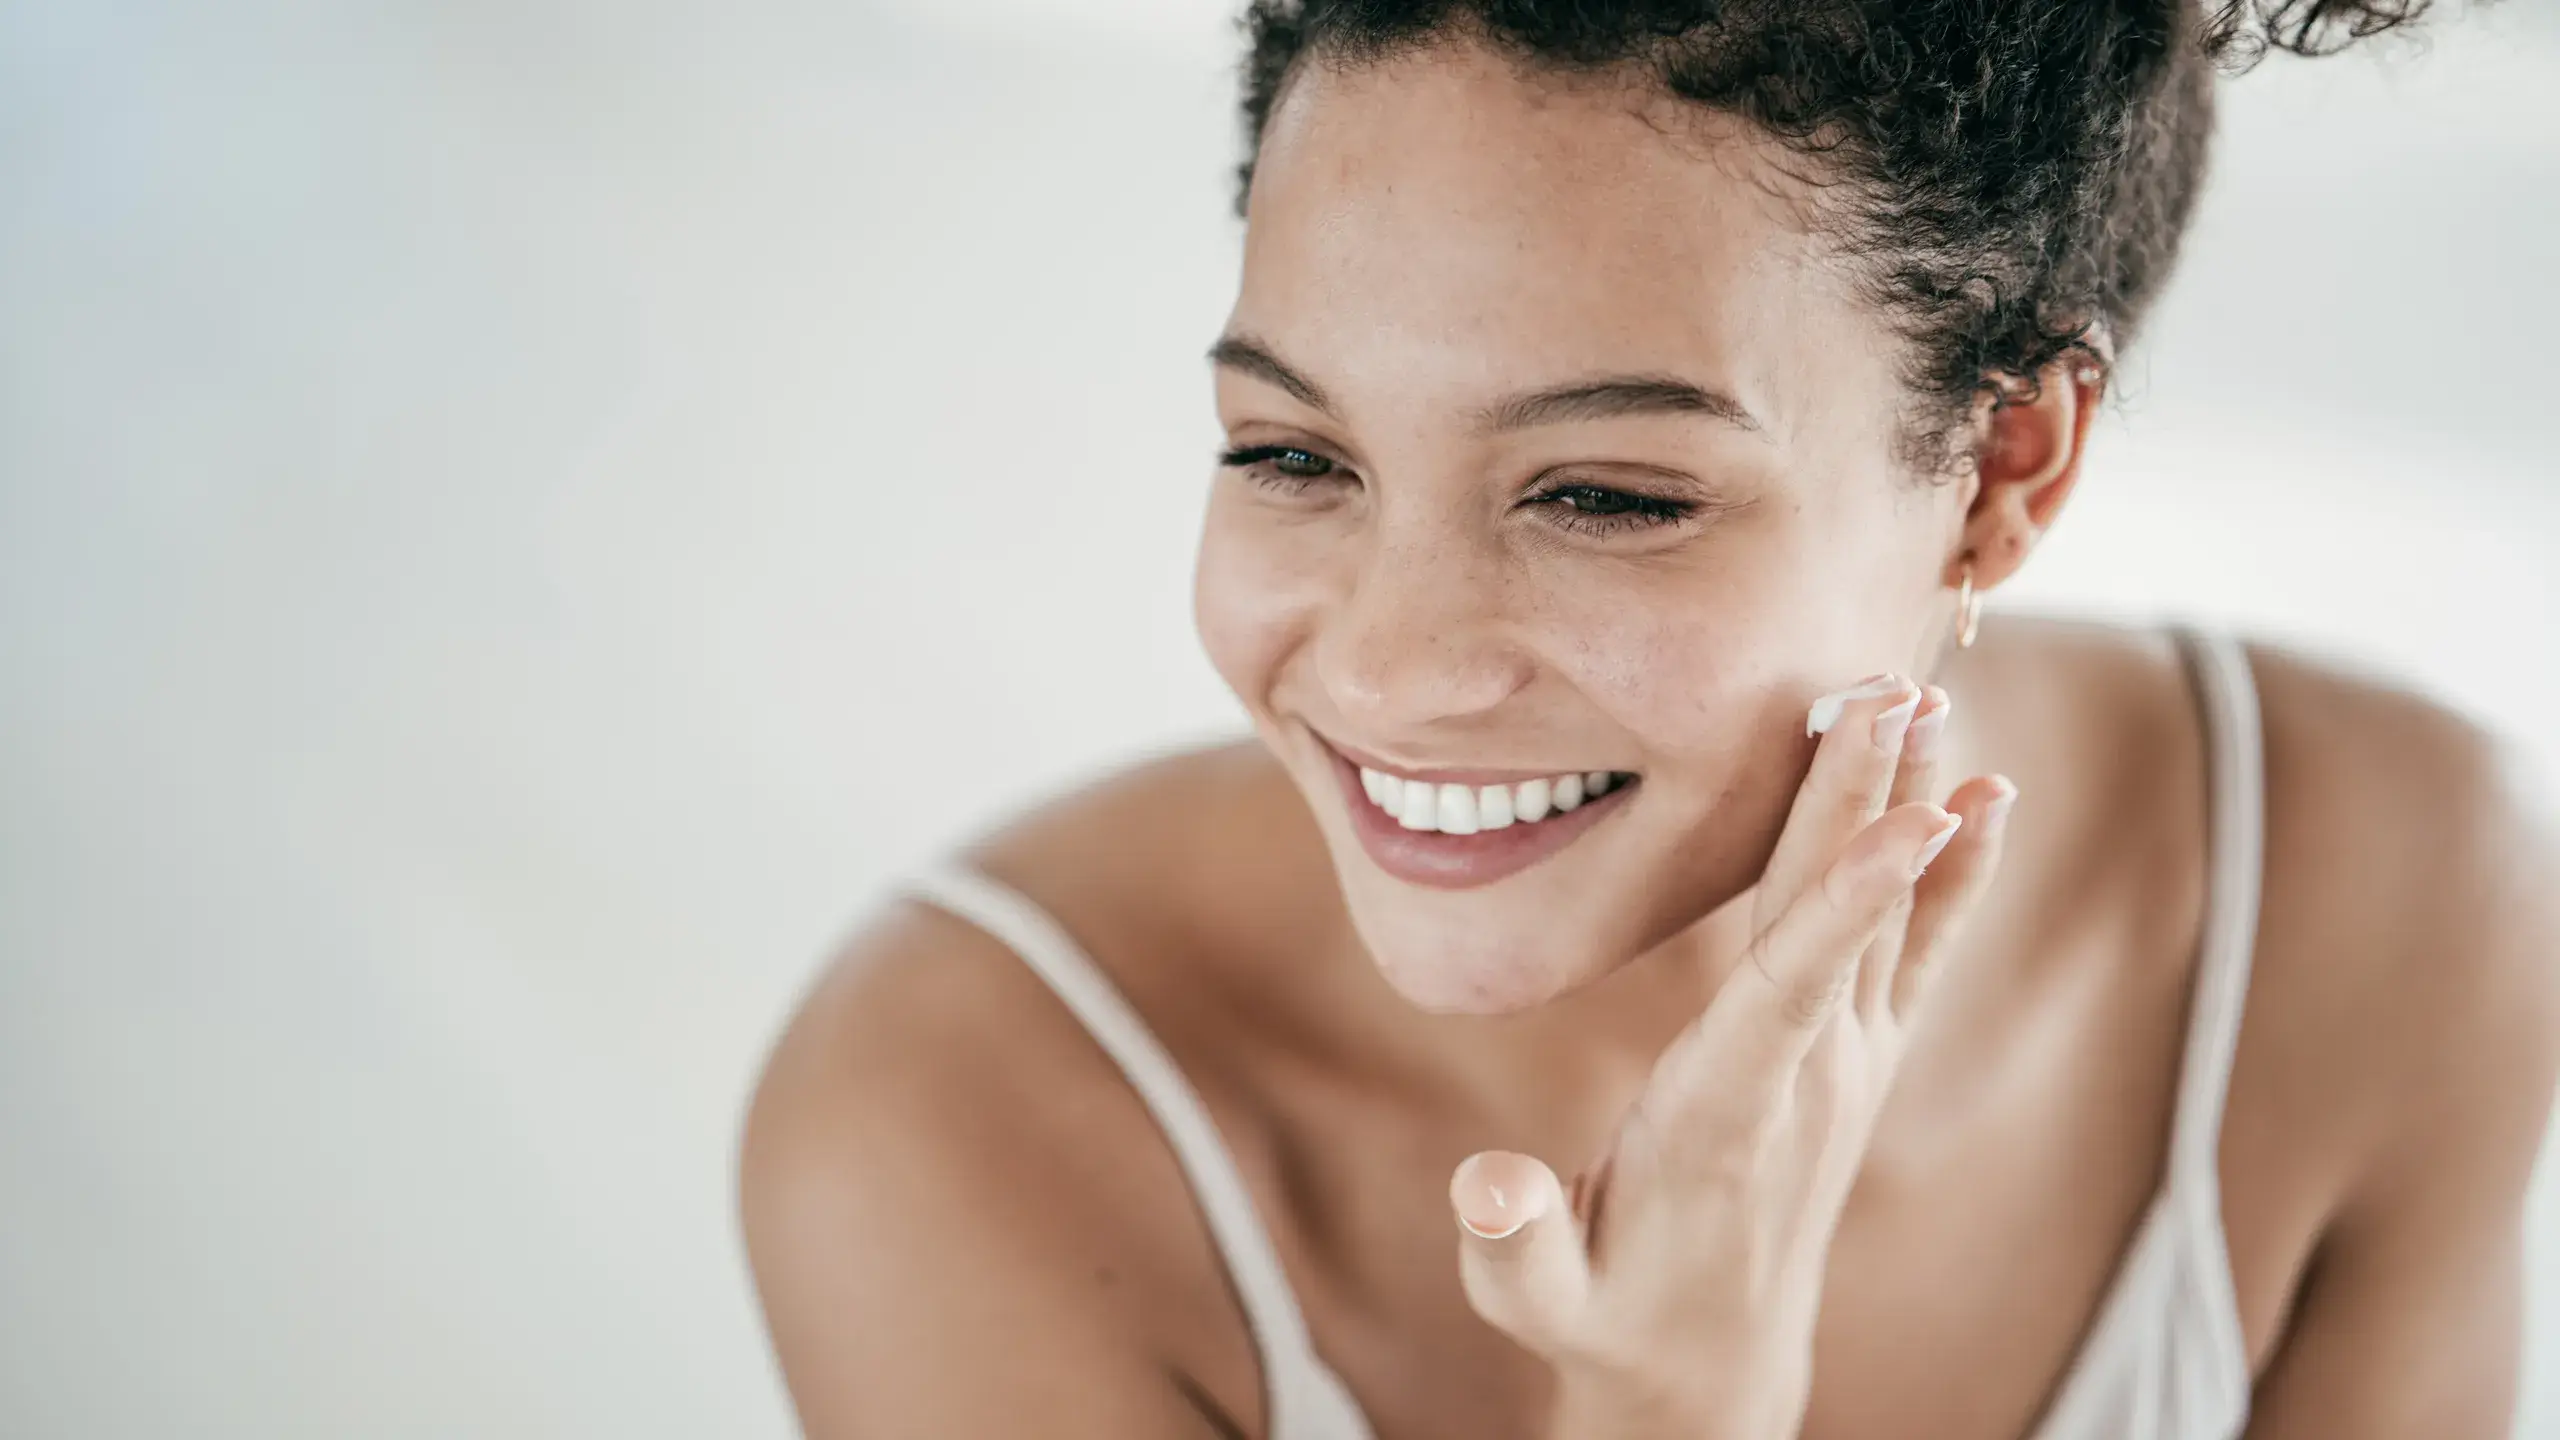 Here's Why You Should Add Retinoid Cream to Your Daily Skincare Routine